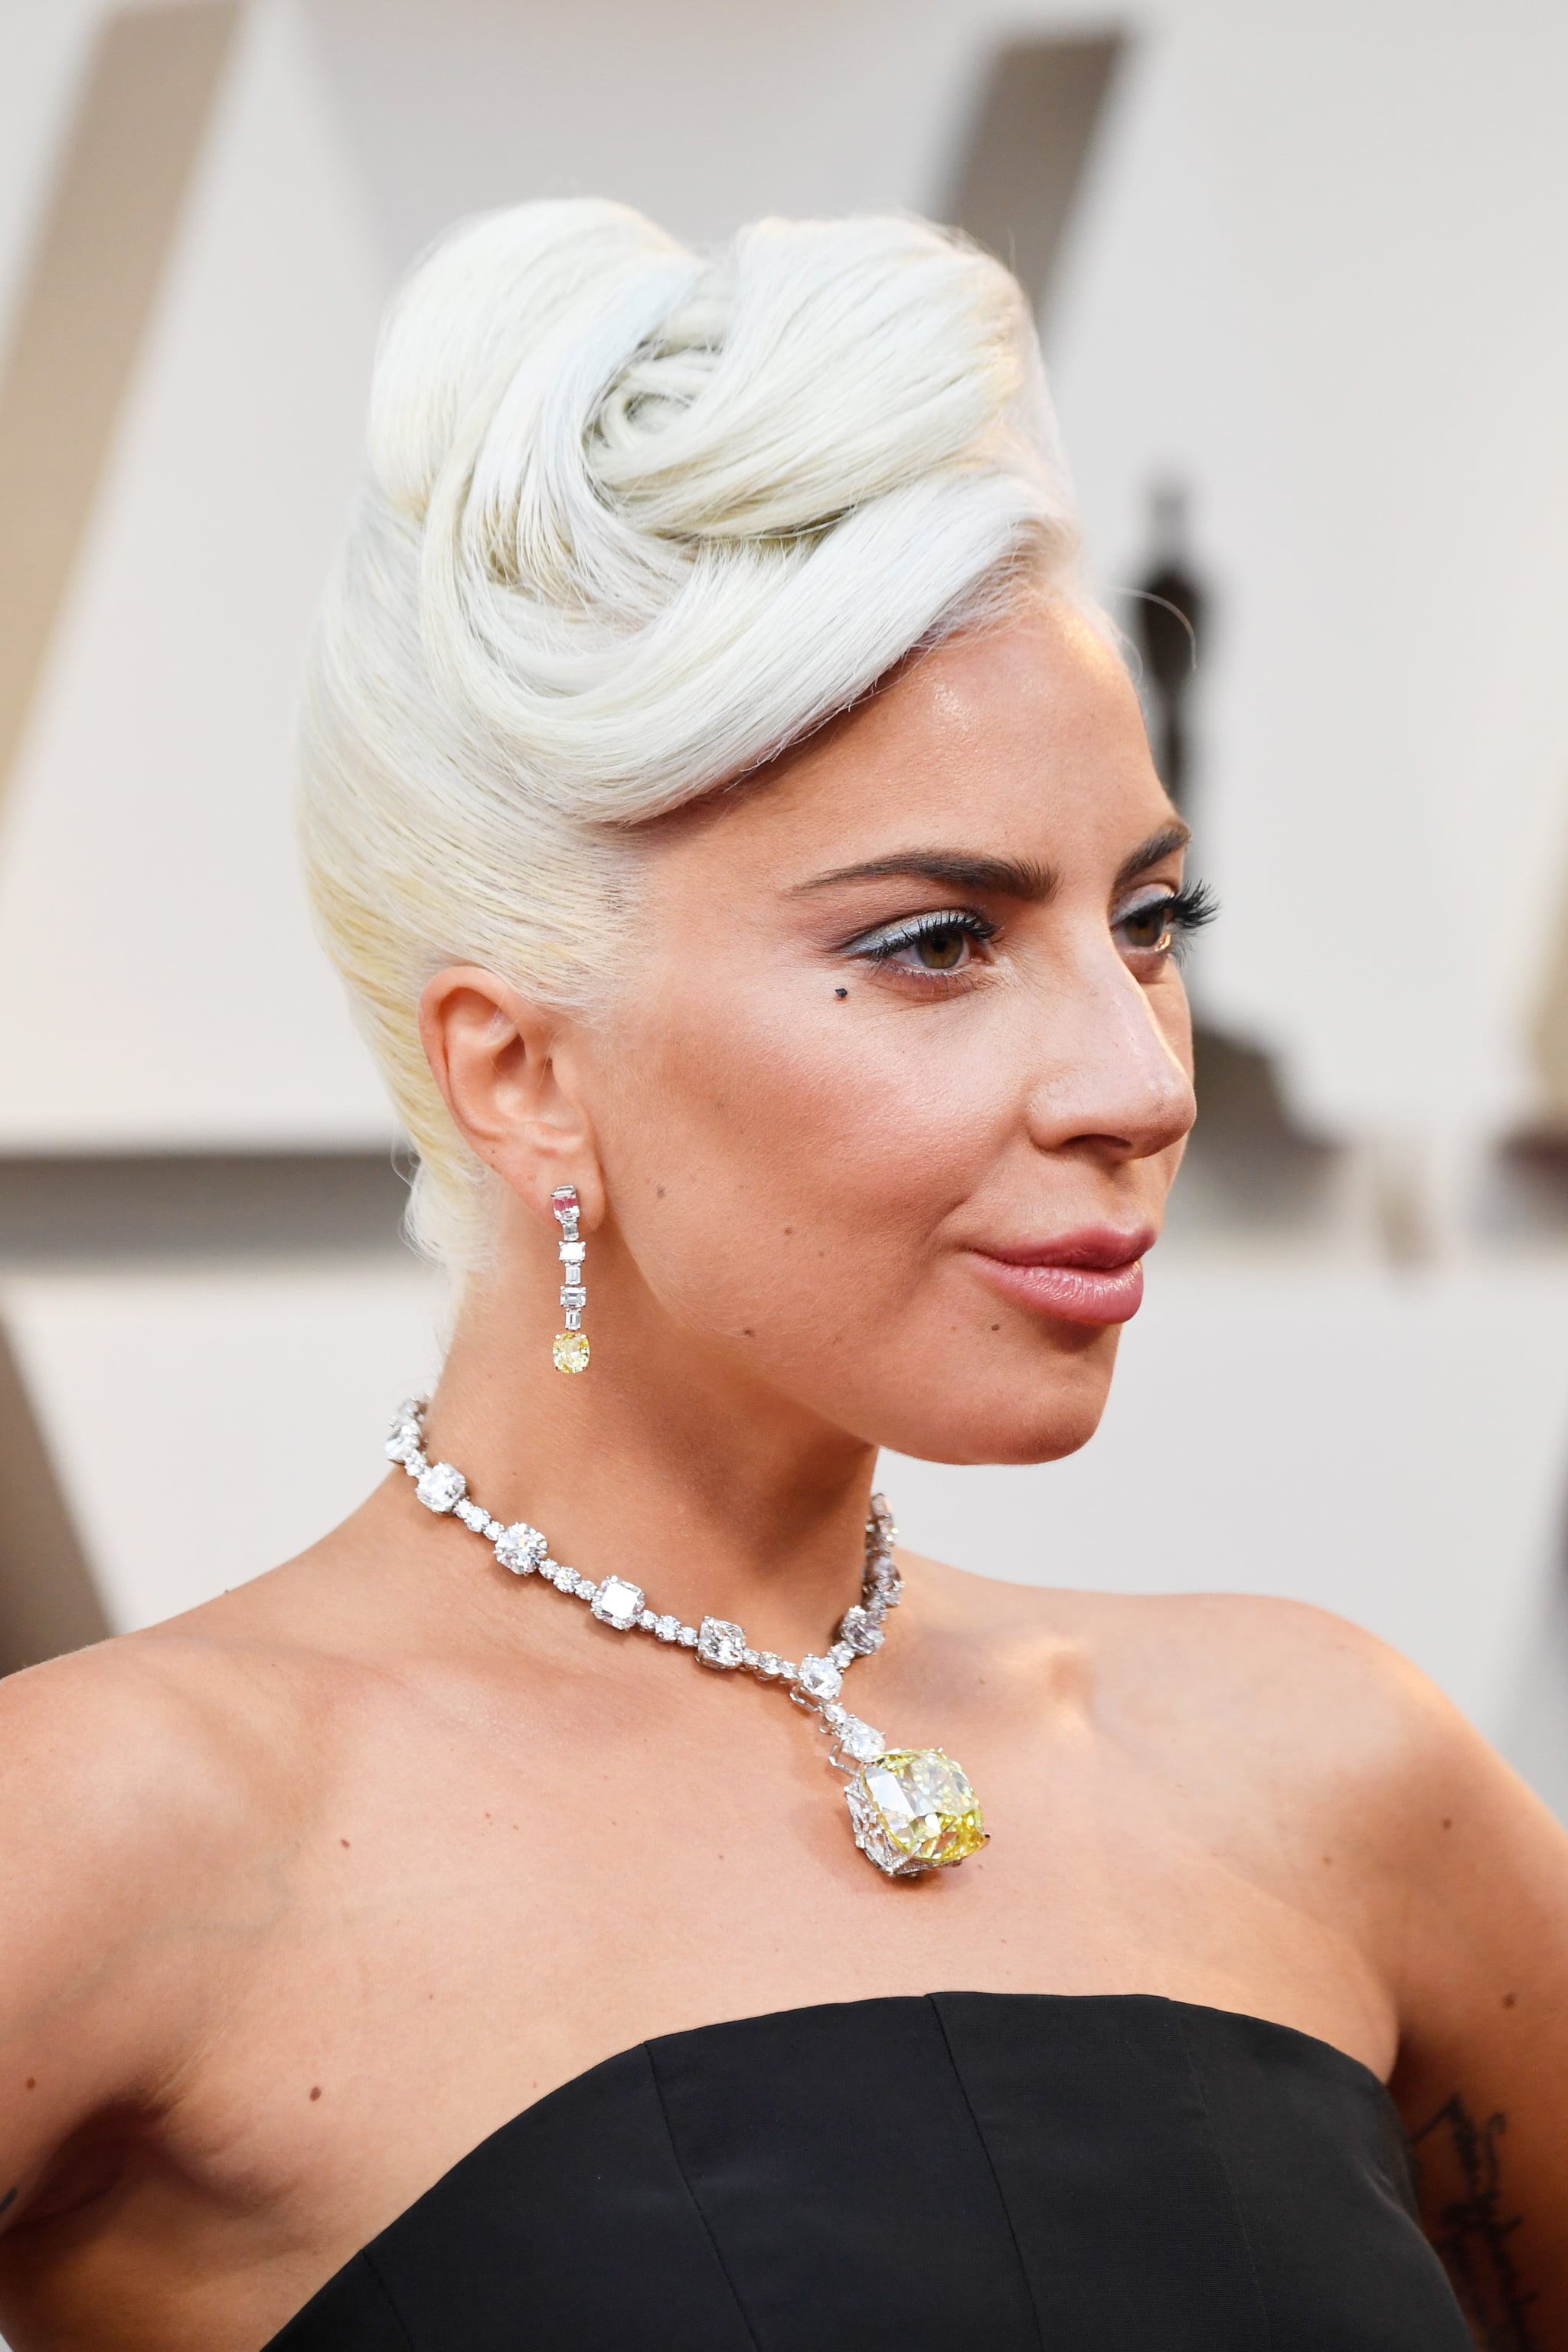 Lady Gaga's Necklace at the 2019 Oscars 